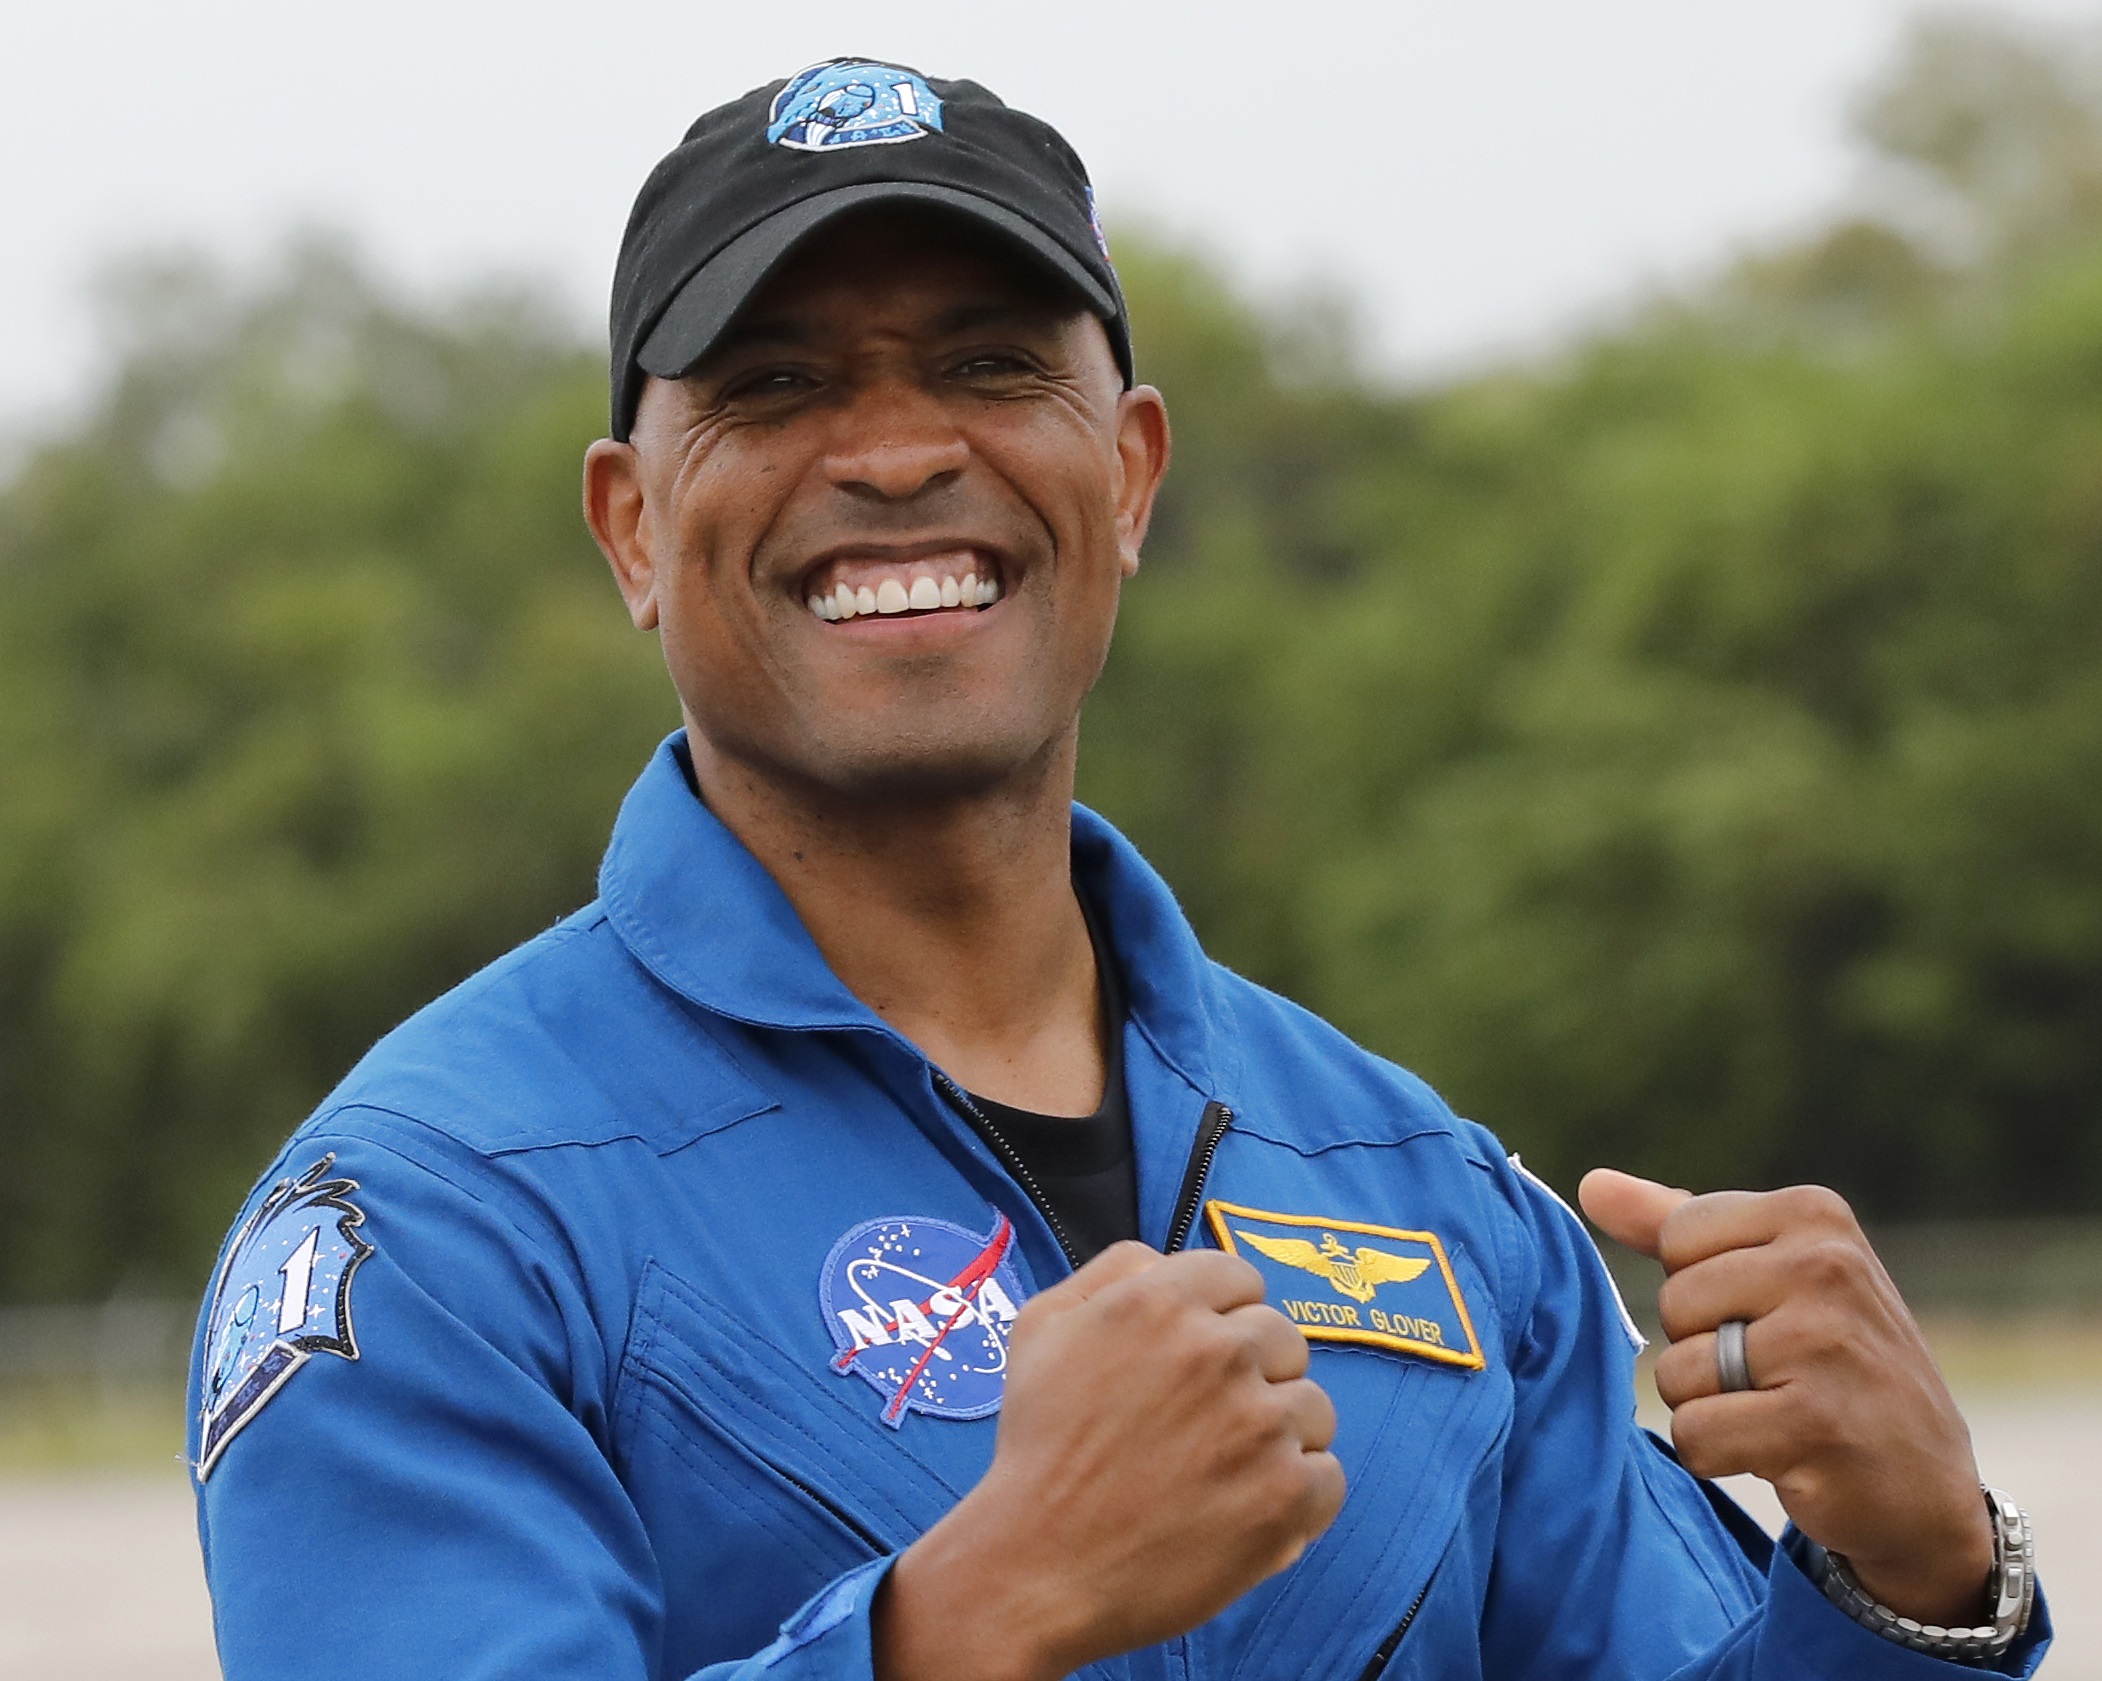 Astronaut Victor Glover Takes Bible and Communion Cups to International Space Station, Plans to Participate in Virtual Church Services